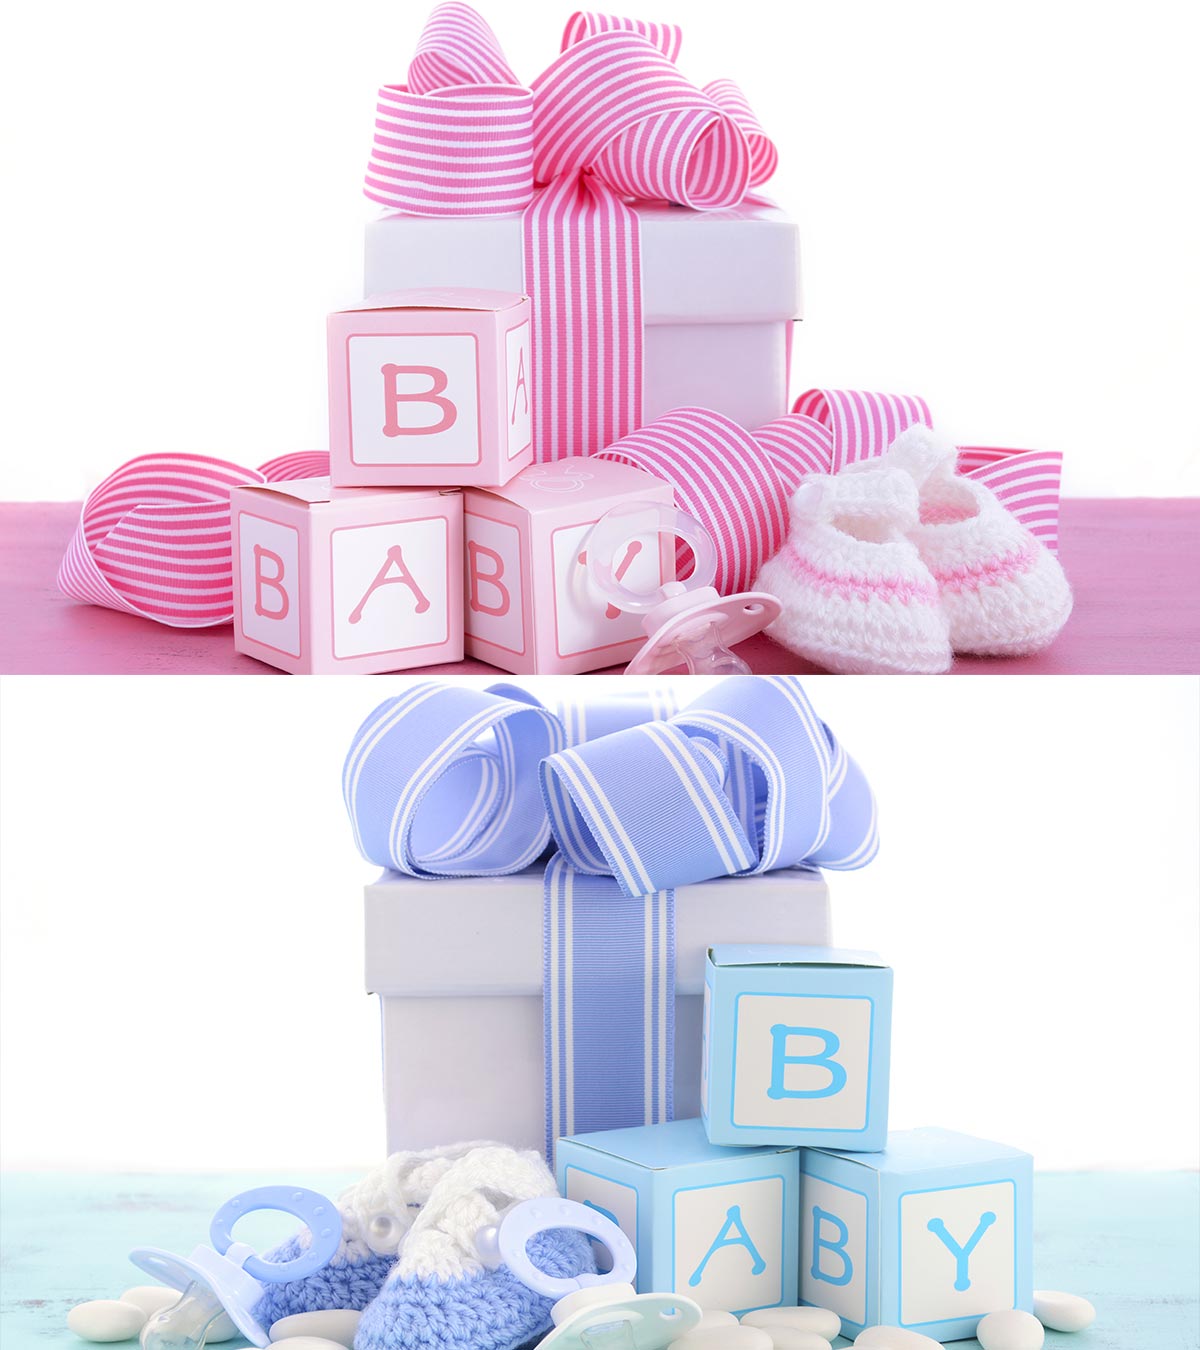 35 Unique Creative Baby Shower Gifts Ideas